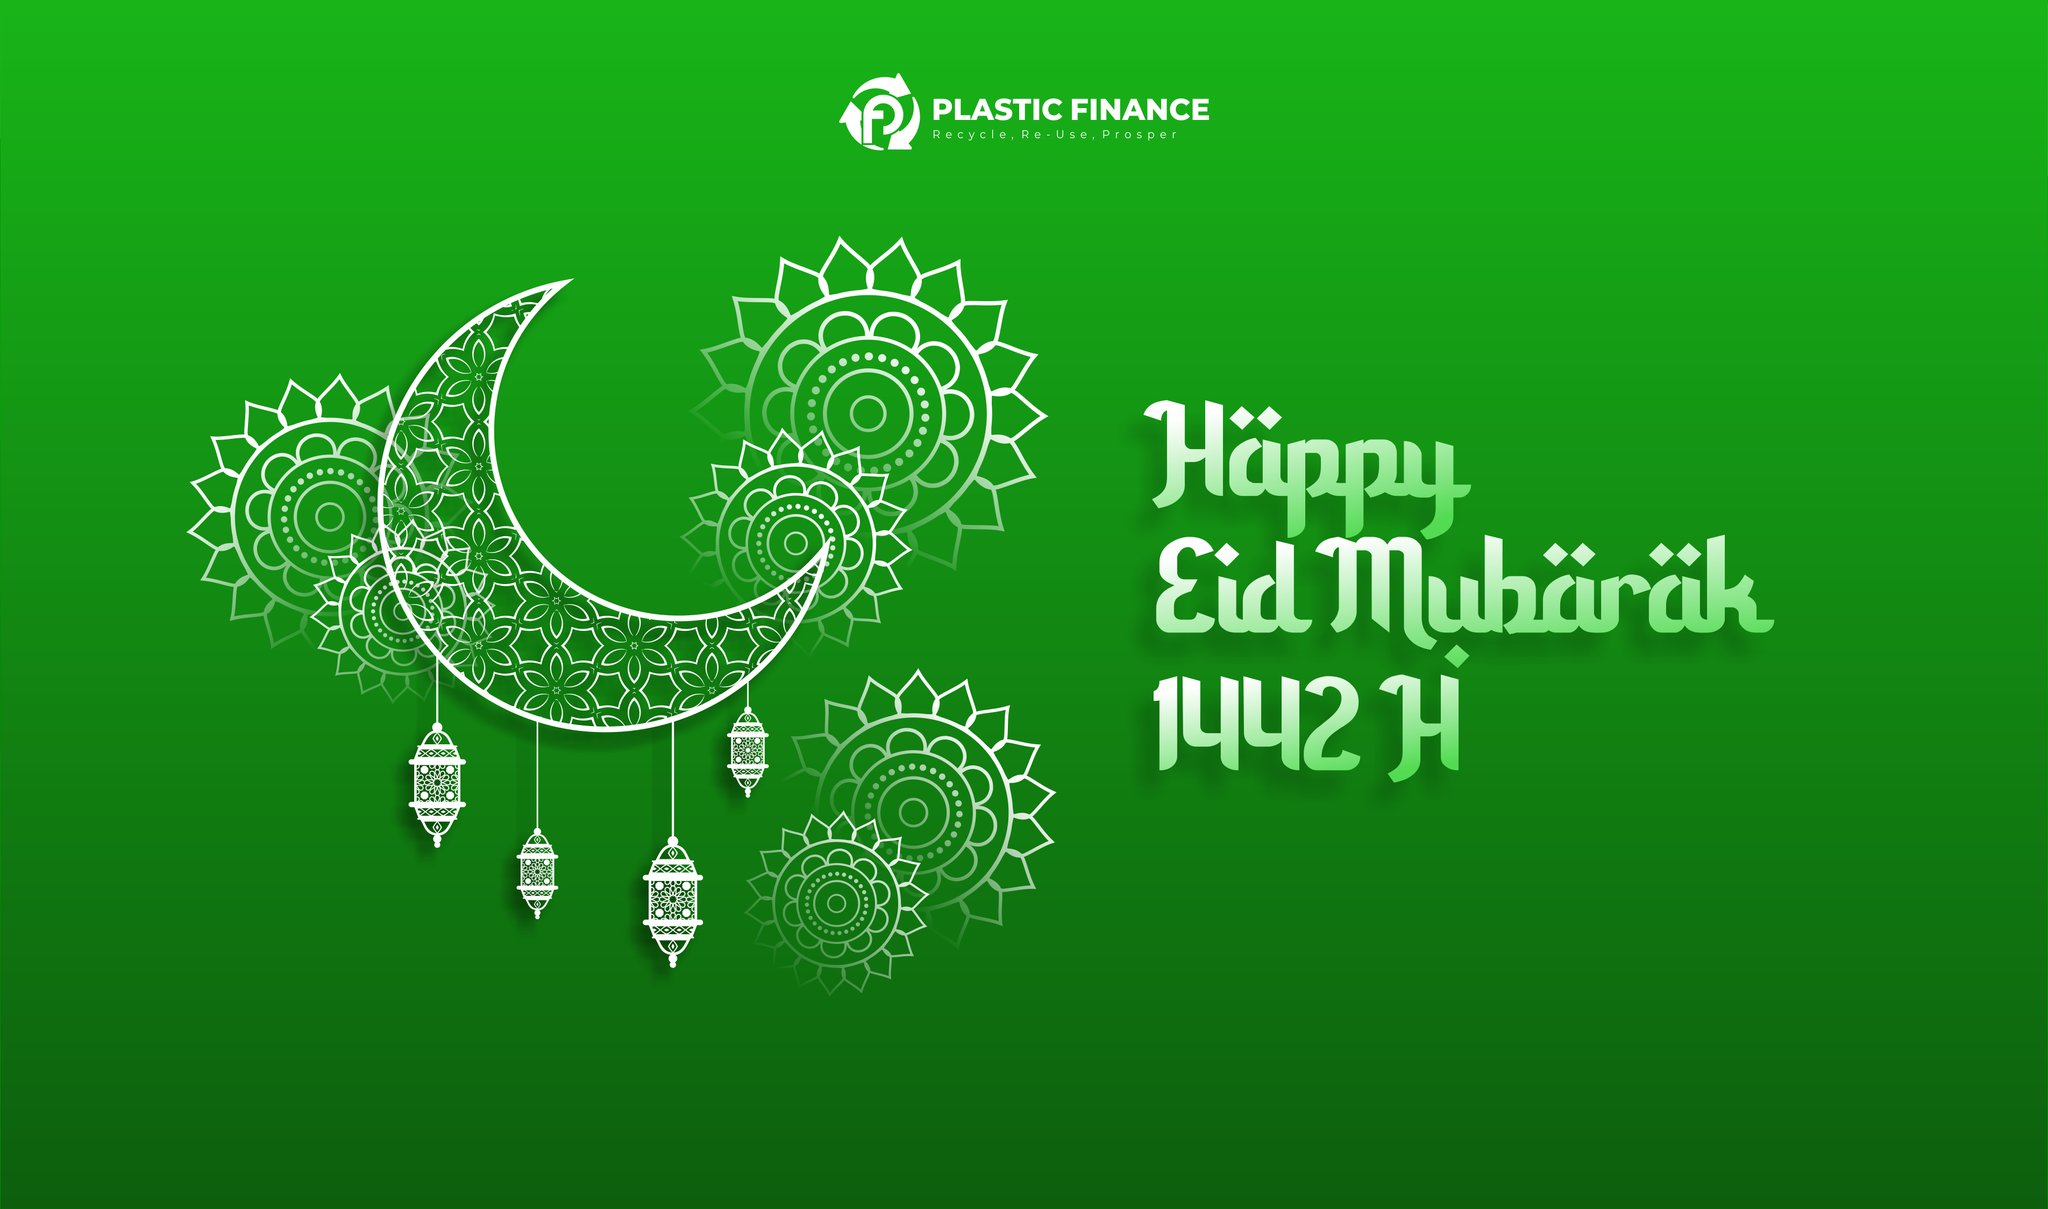 Plastic Finance on Twitter: "🙌🏻🙌🏻🙌🏻 Eid Mubarak for our Moslem Friends! May this Eid bring nothing but and peace for all. Stay and Happy Eid day Folks 😇🙏🏻🤗🕌🕌🕌 #EidAlFitr #PlasticFinance #